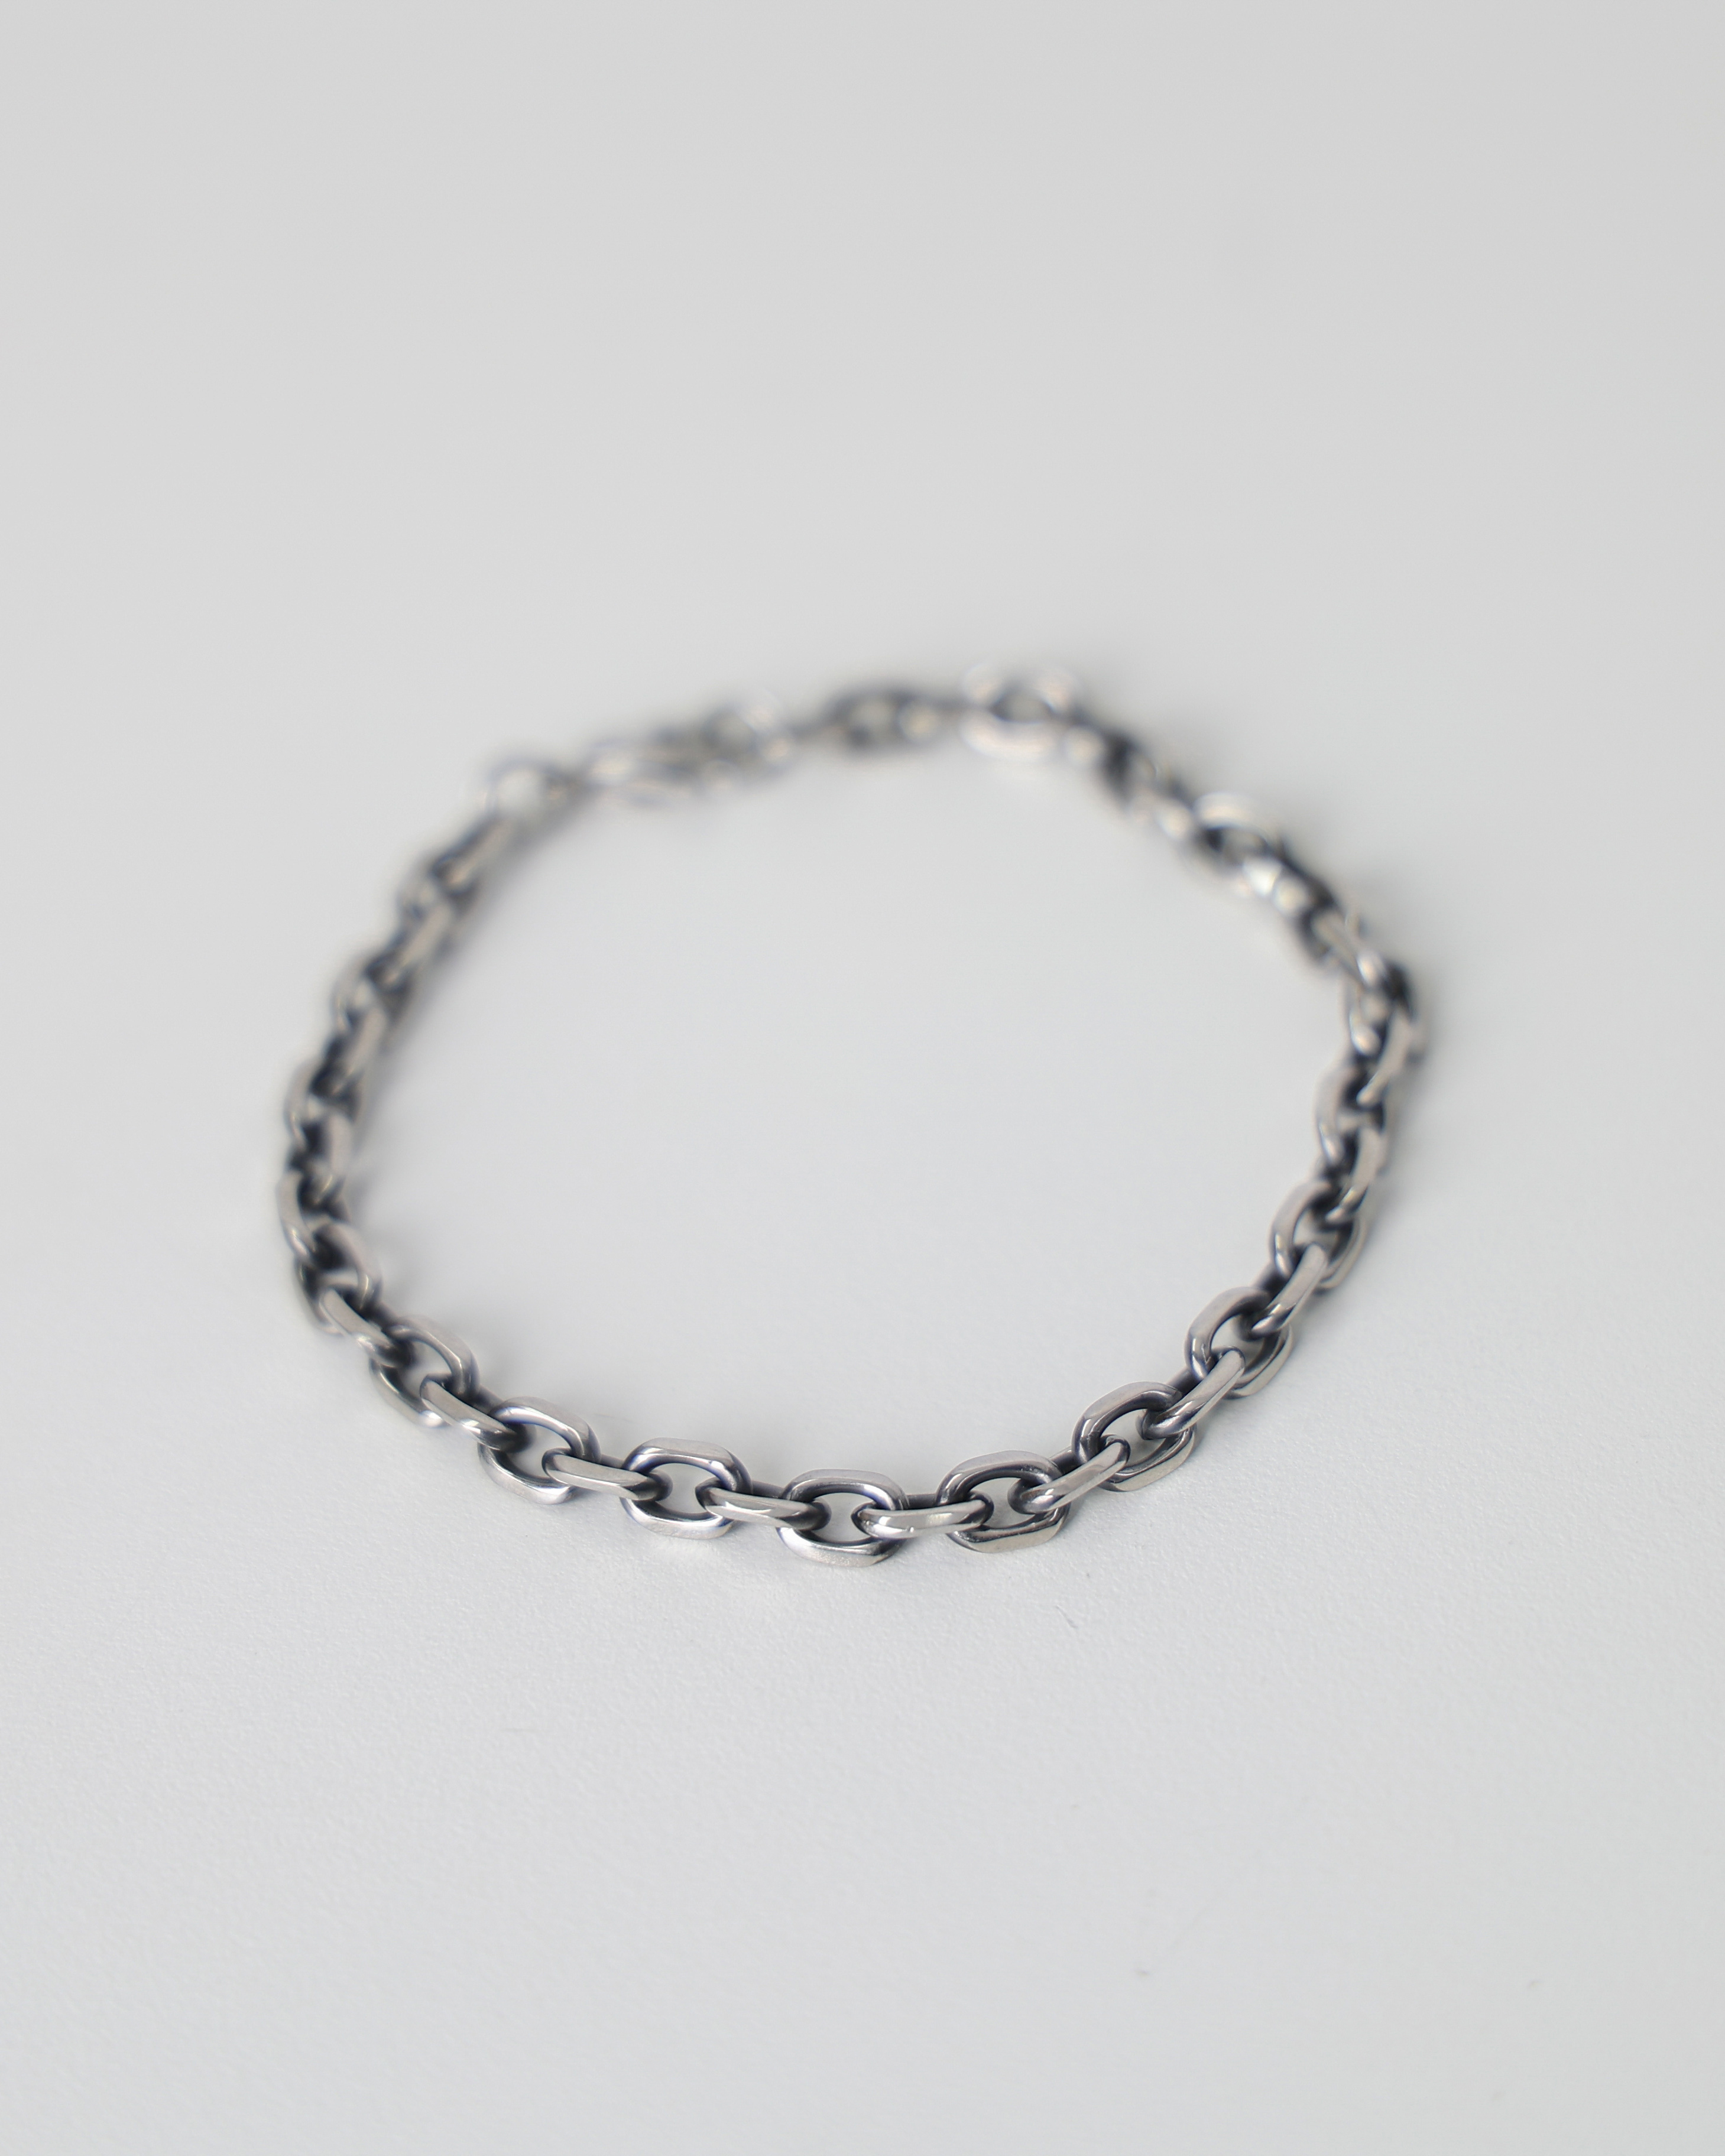 UTOO Surgical Steel Chain Bracelet